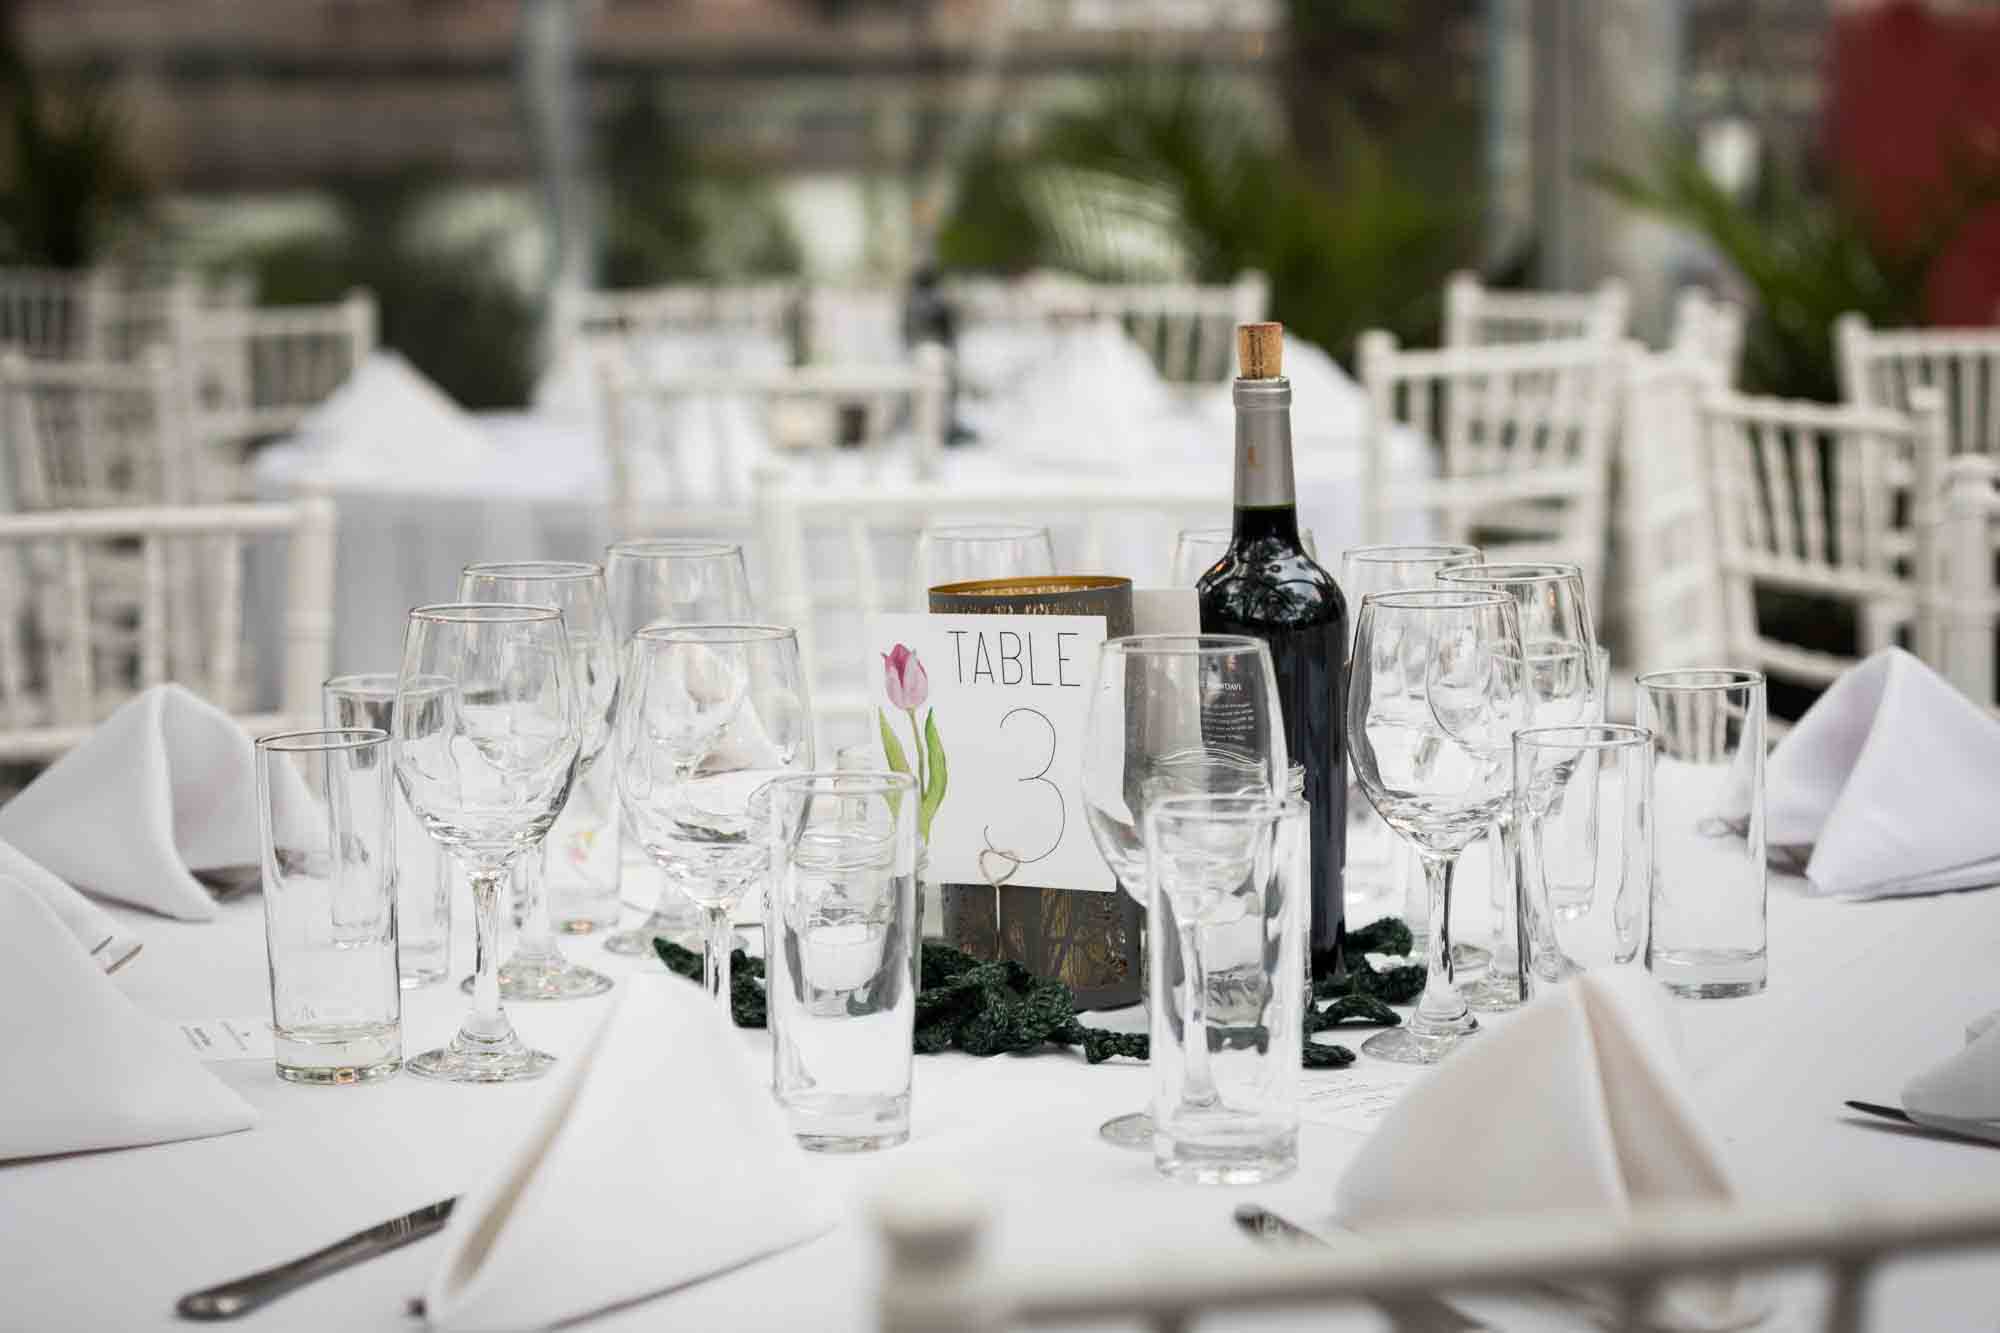 Table setting with glasses, table 3 sign, and wine bottle at a Sanctuary Roosevelt Island wedding